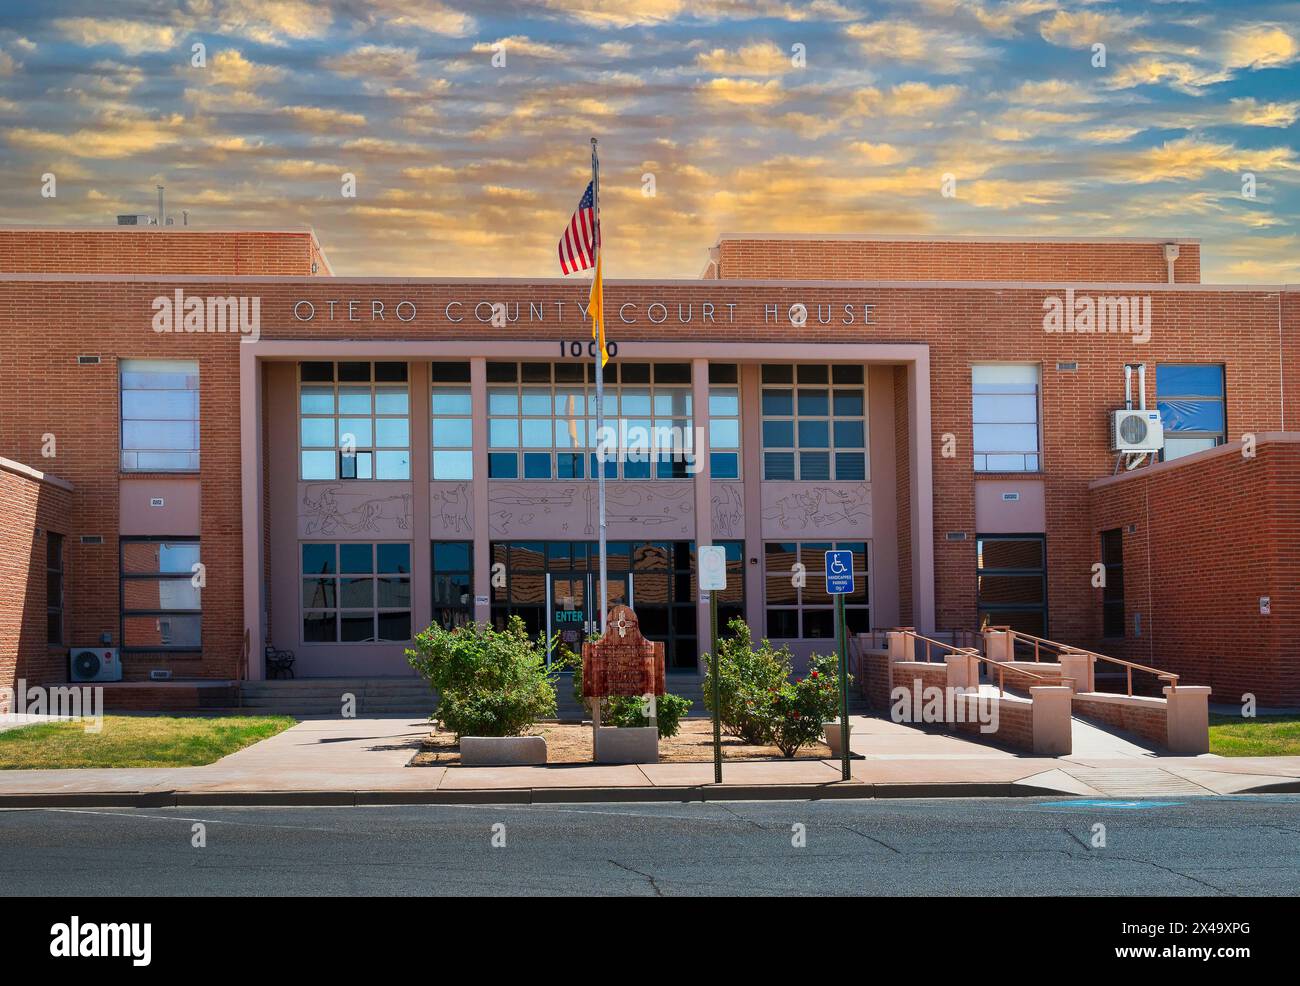 Sunset highlights the Otero County Court house in downtown Alamagordo, NM, USA Stock Photo